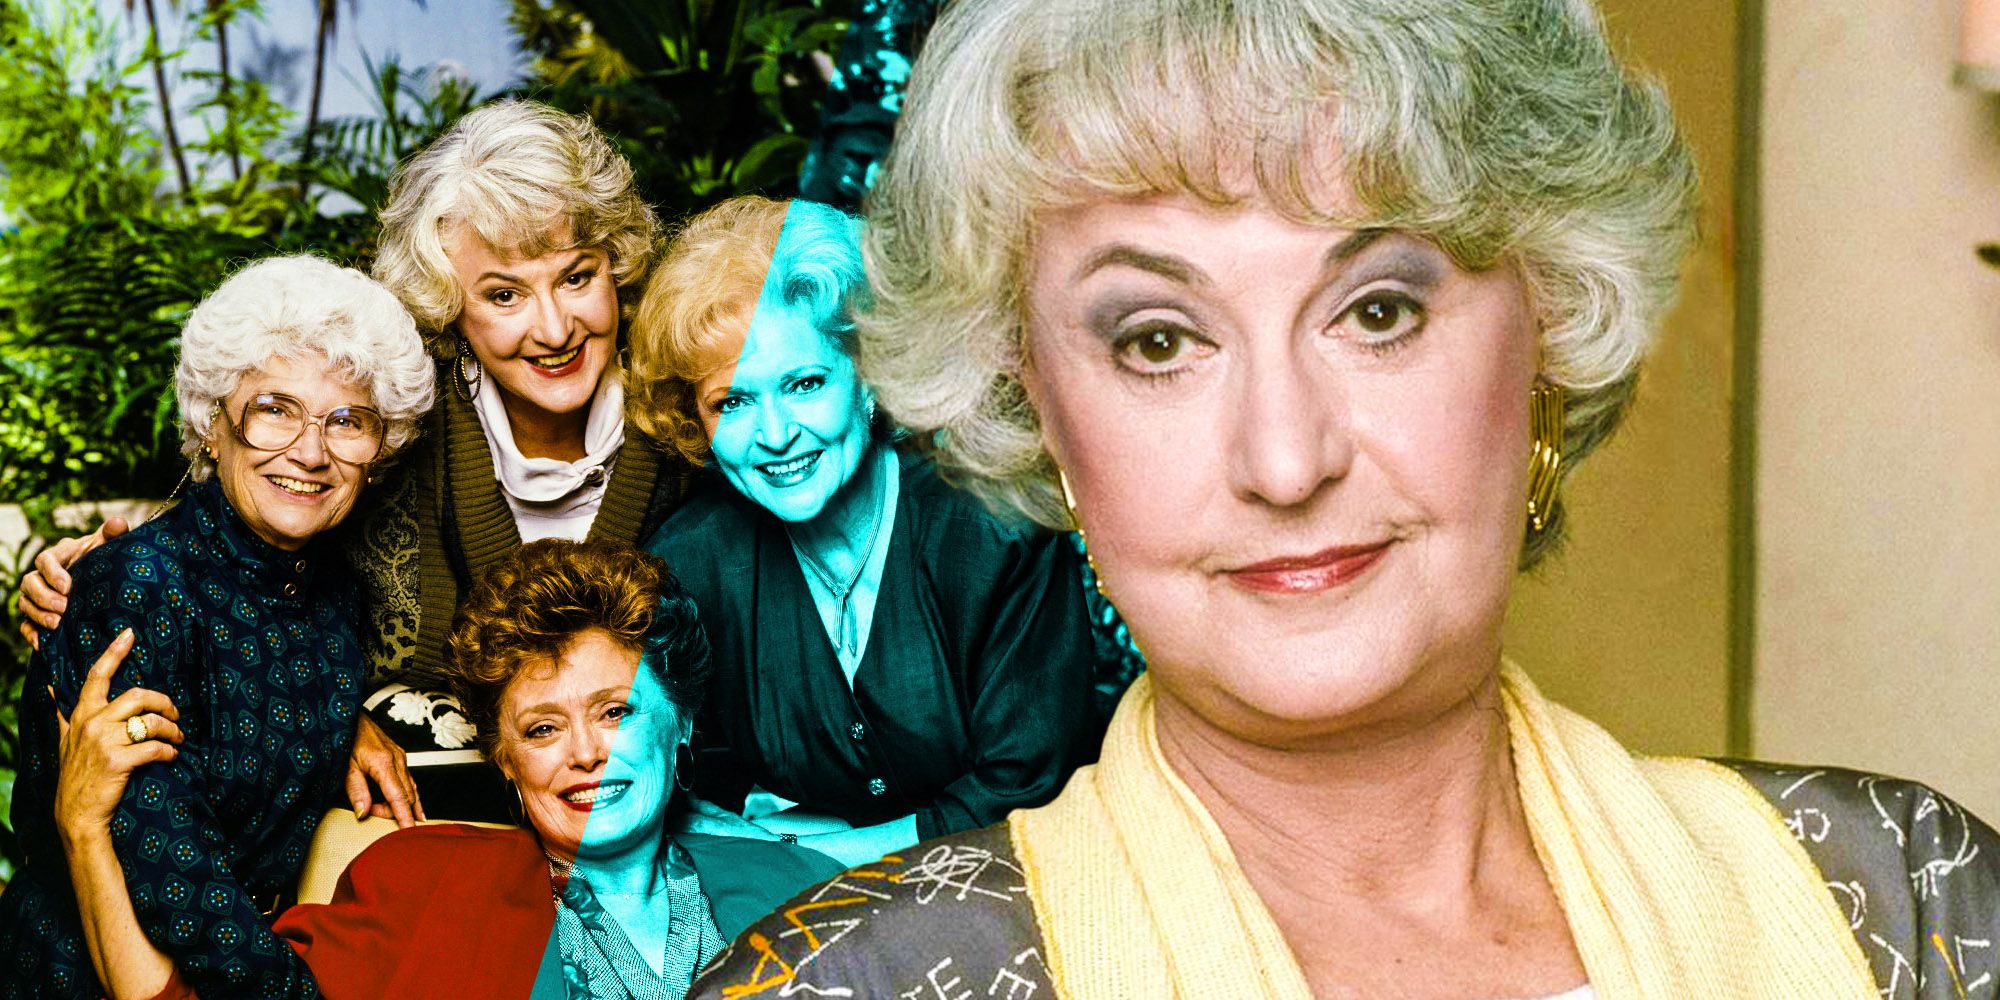 How Old Were the Golden Girls?